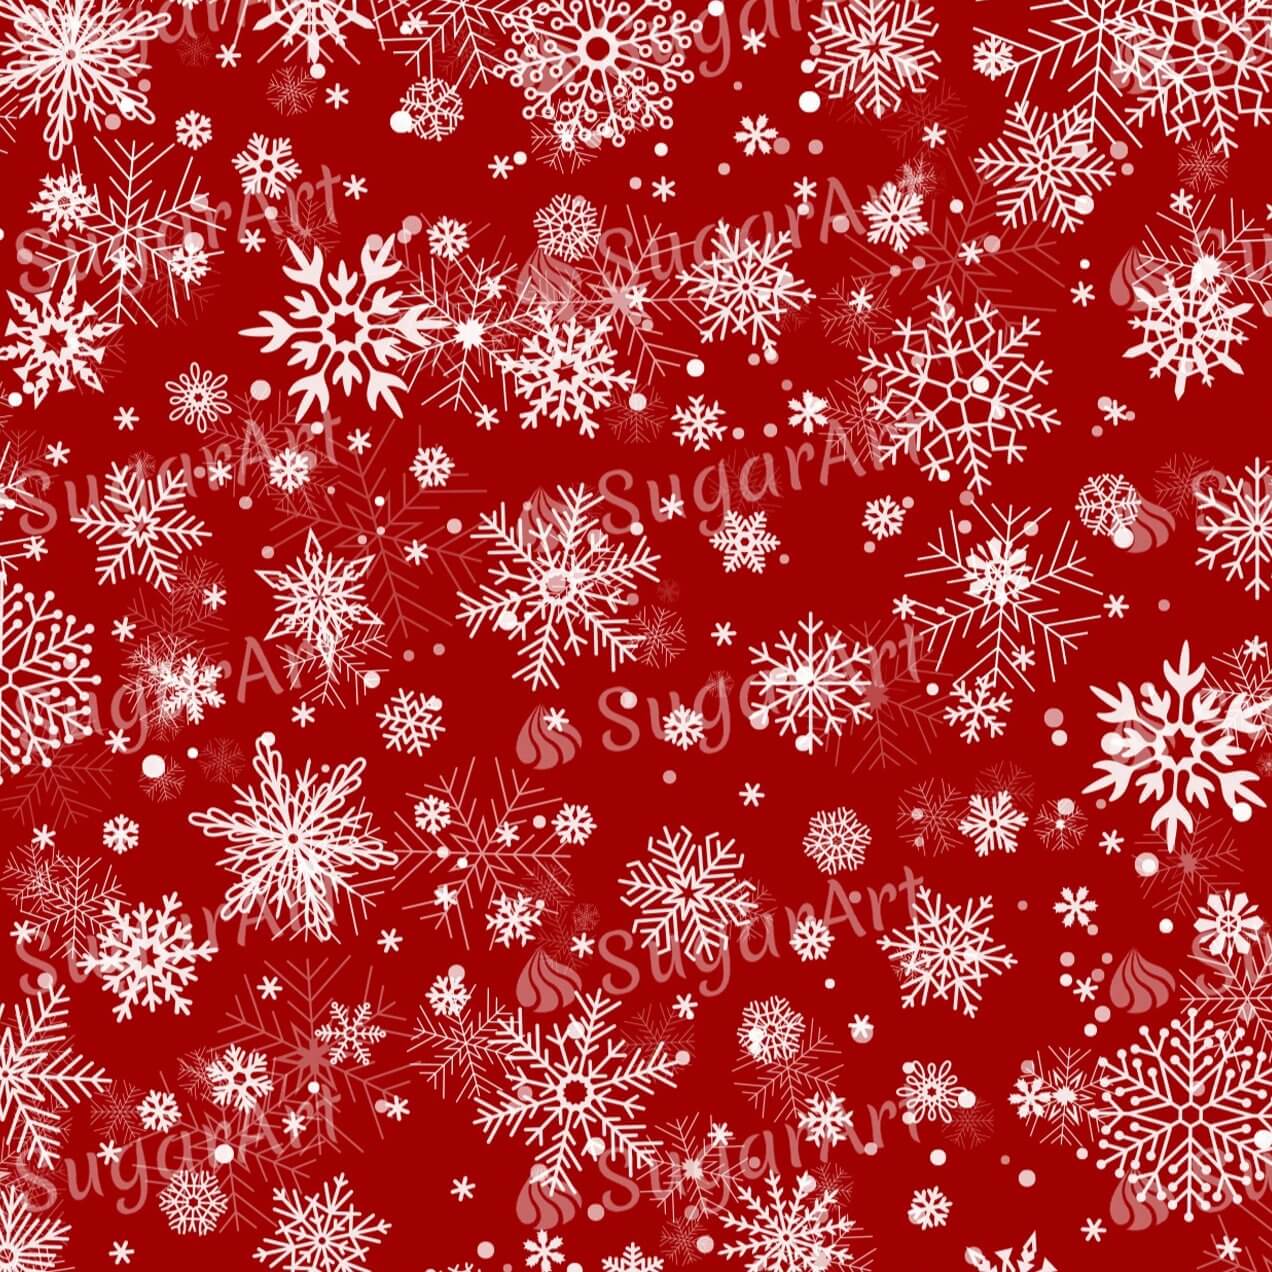 White Snowflakes on Red Background - Icing - ISA042.